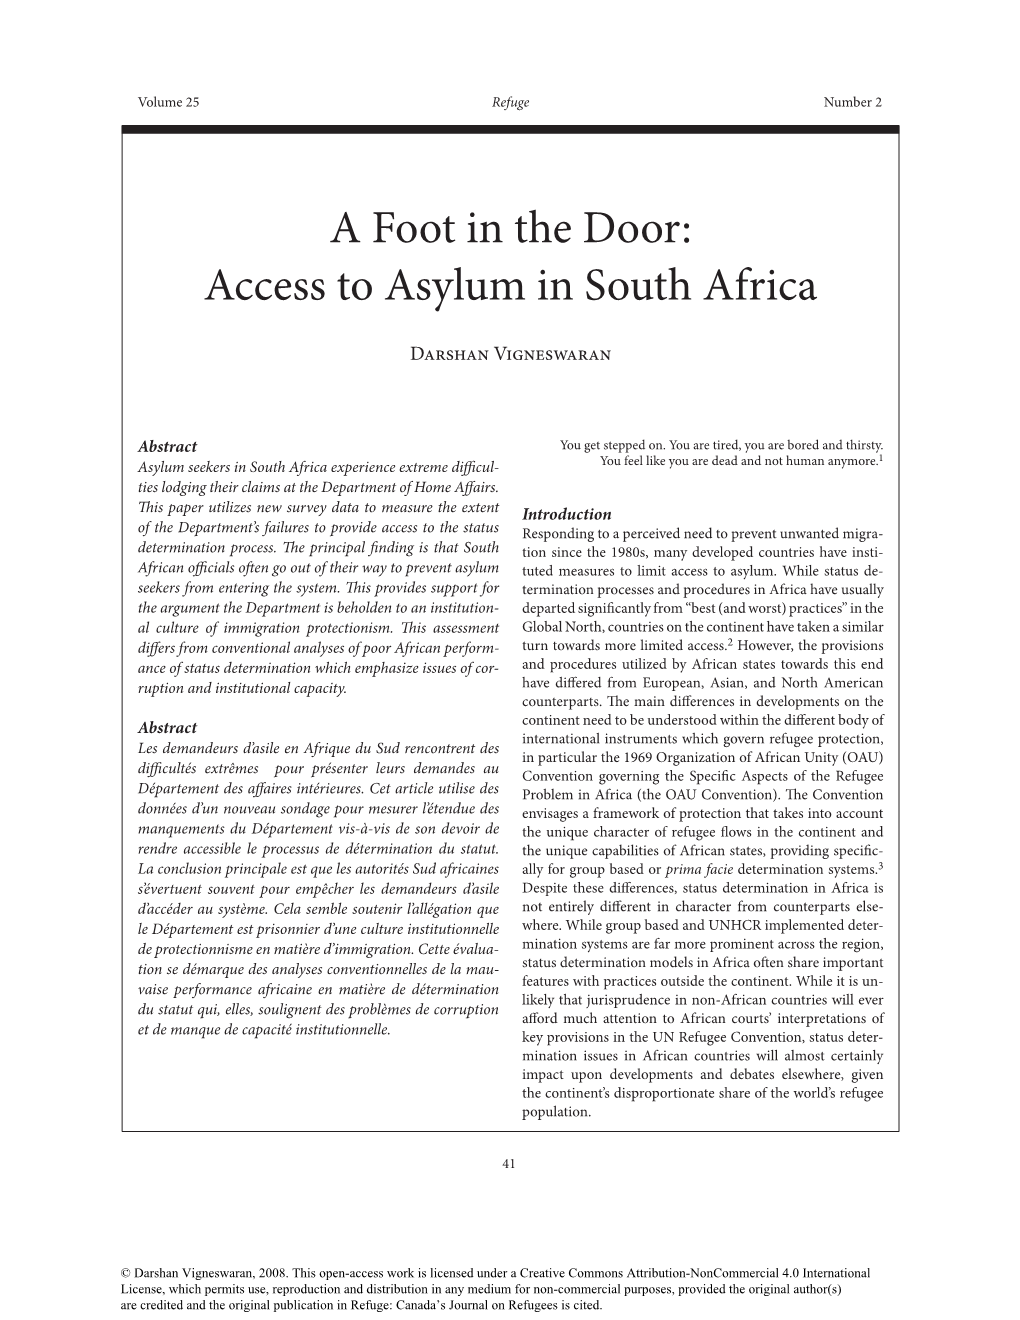 Access to Asylum in South Africa